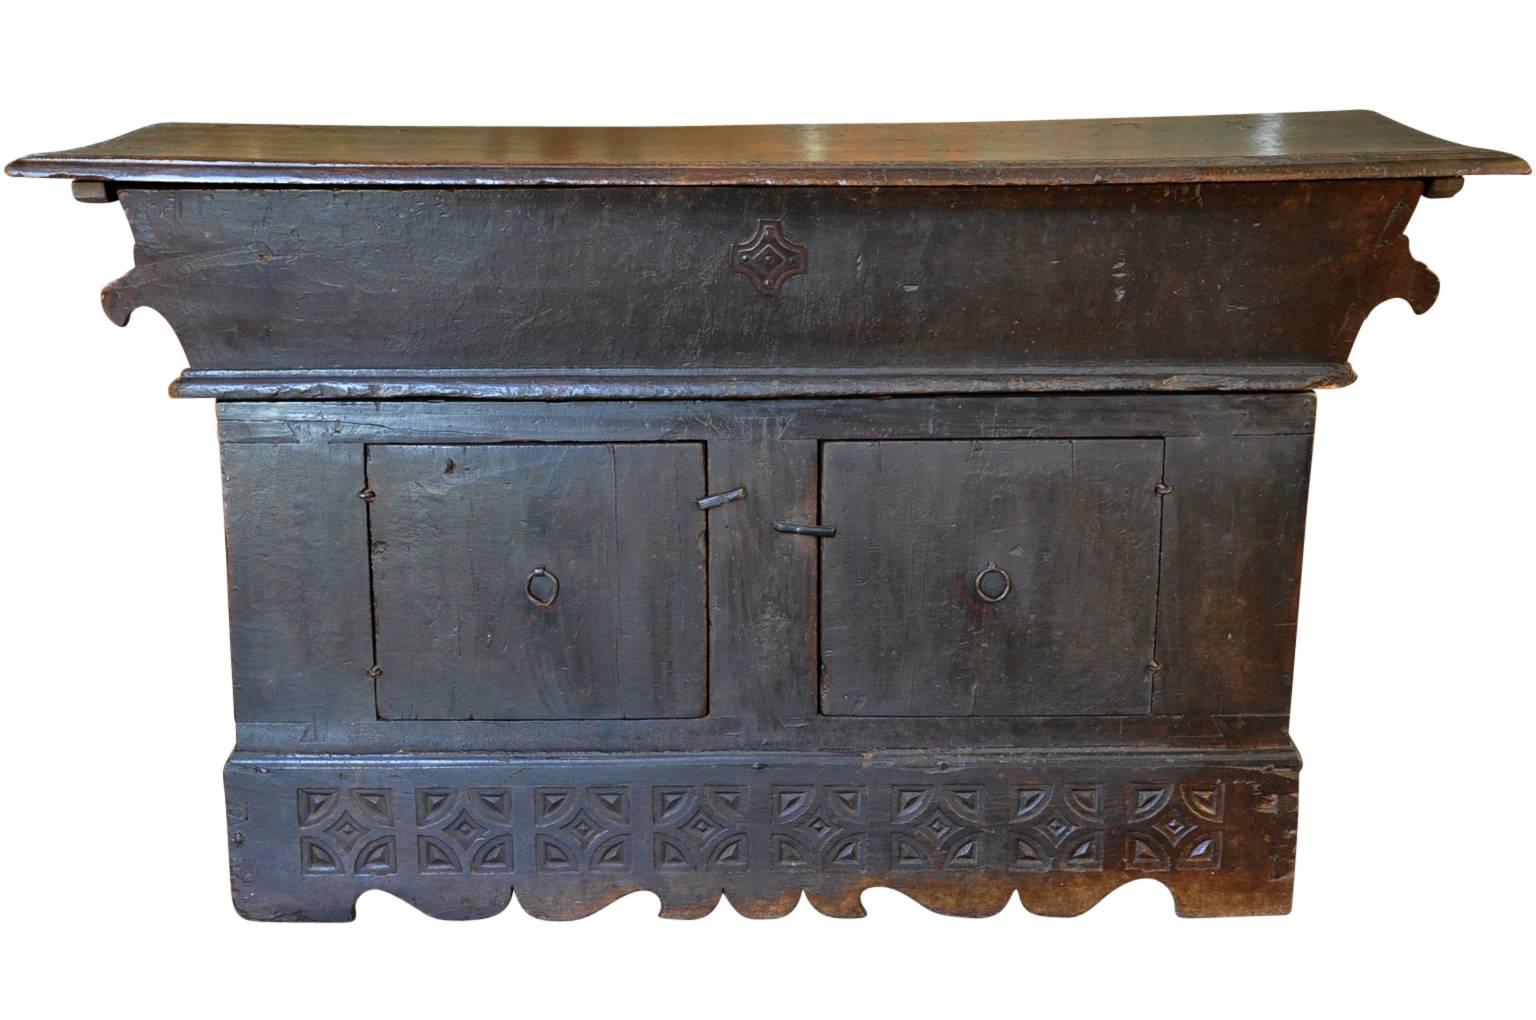 A very rare and outstanding early 18th century Petrin console from the Bologna region of Italy. Such a piece is where dough was placed to rise. Wonderfully constructed from walnut with a solid board top and ample storage. Tremendous patina.